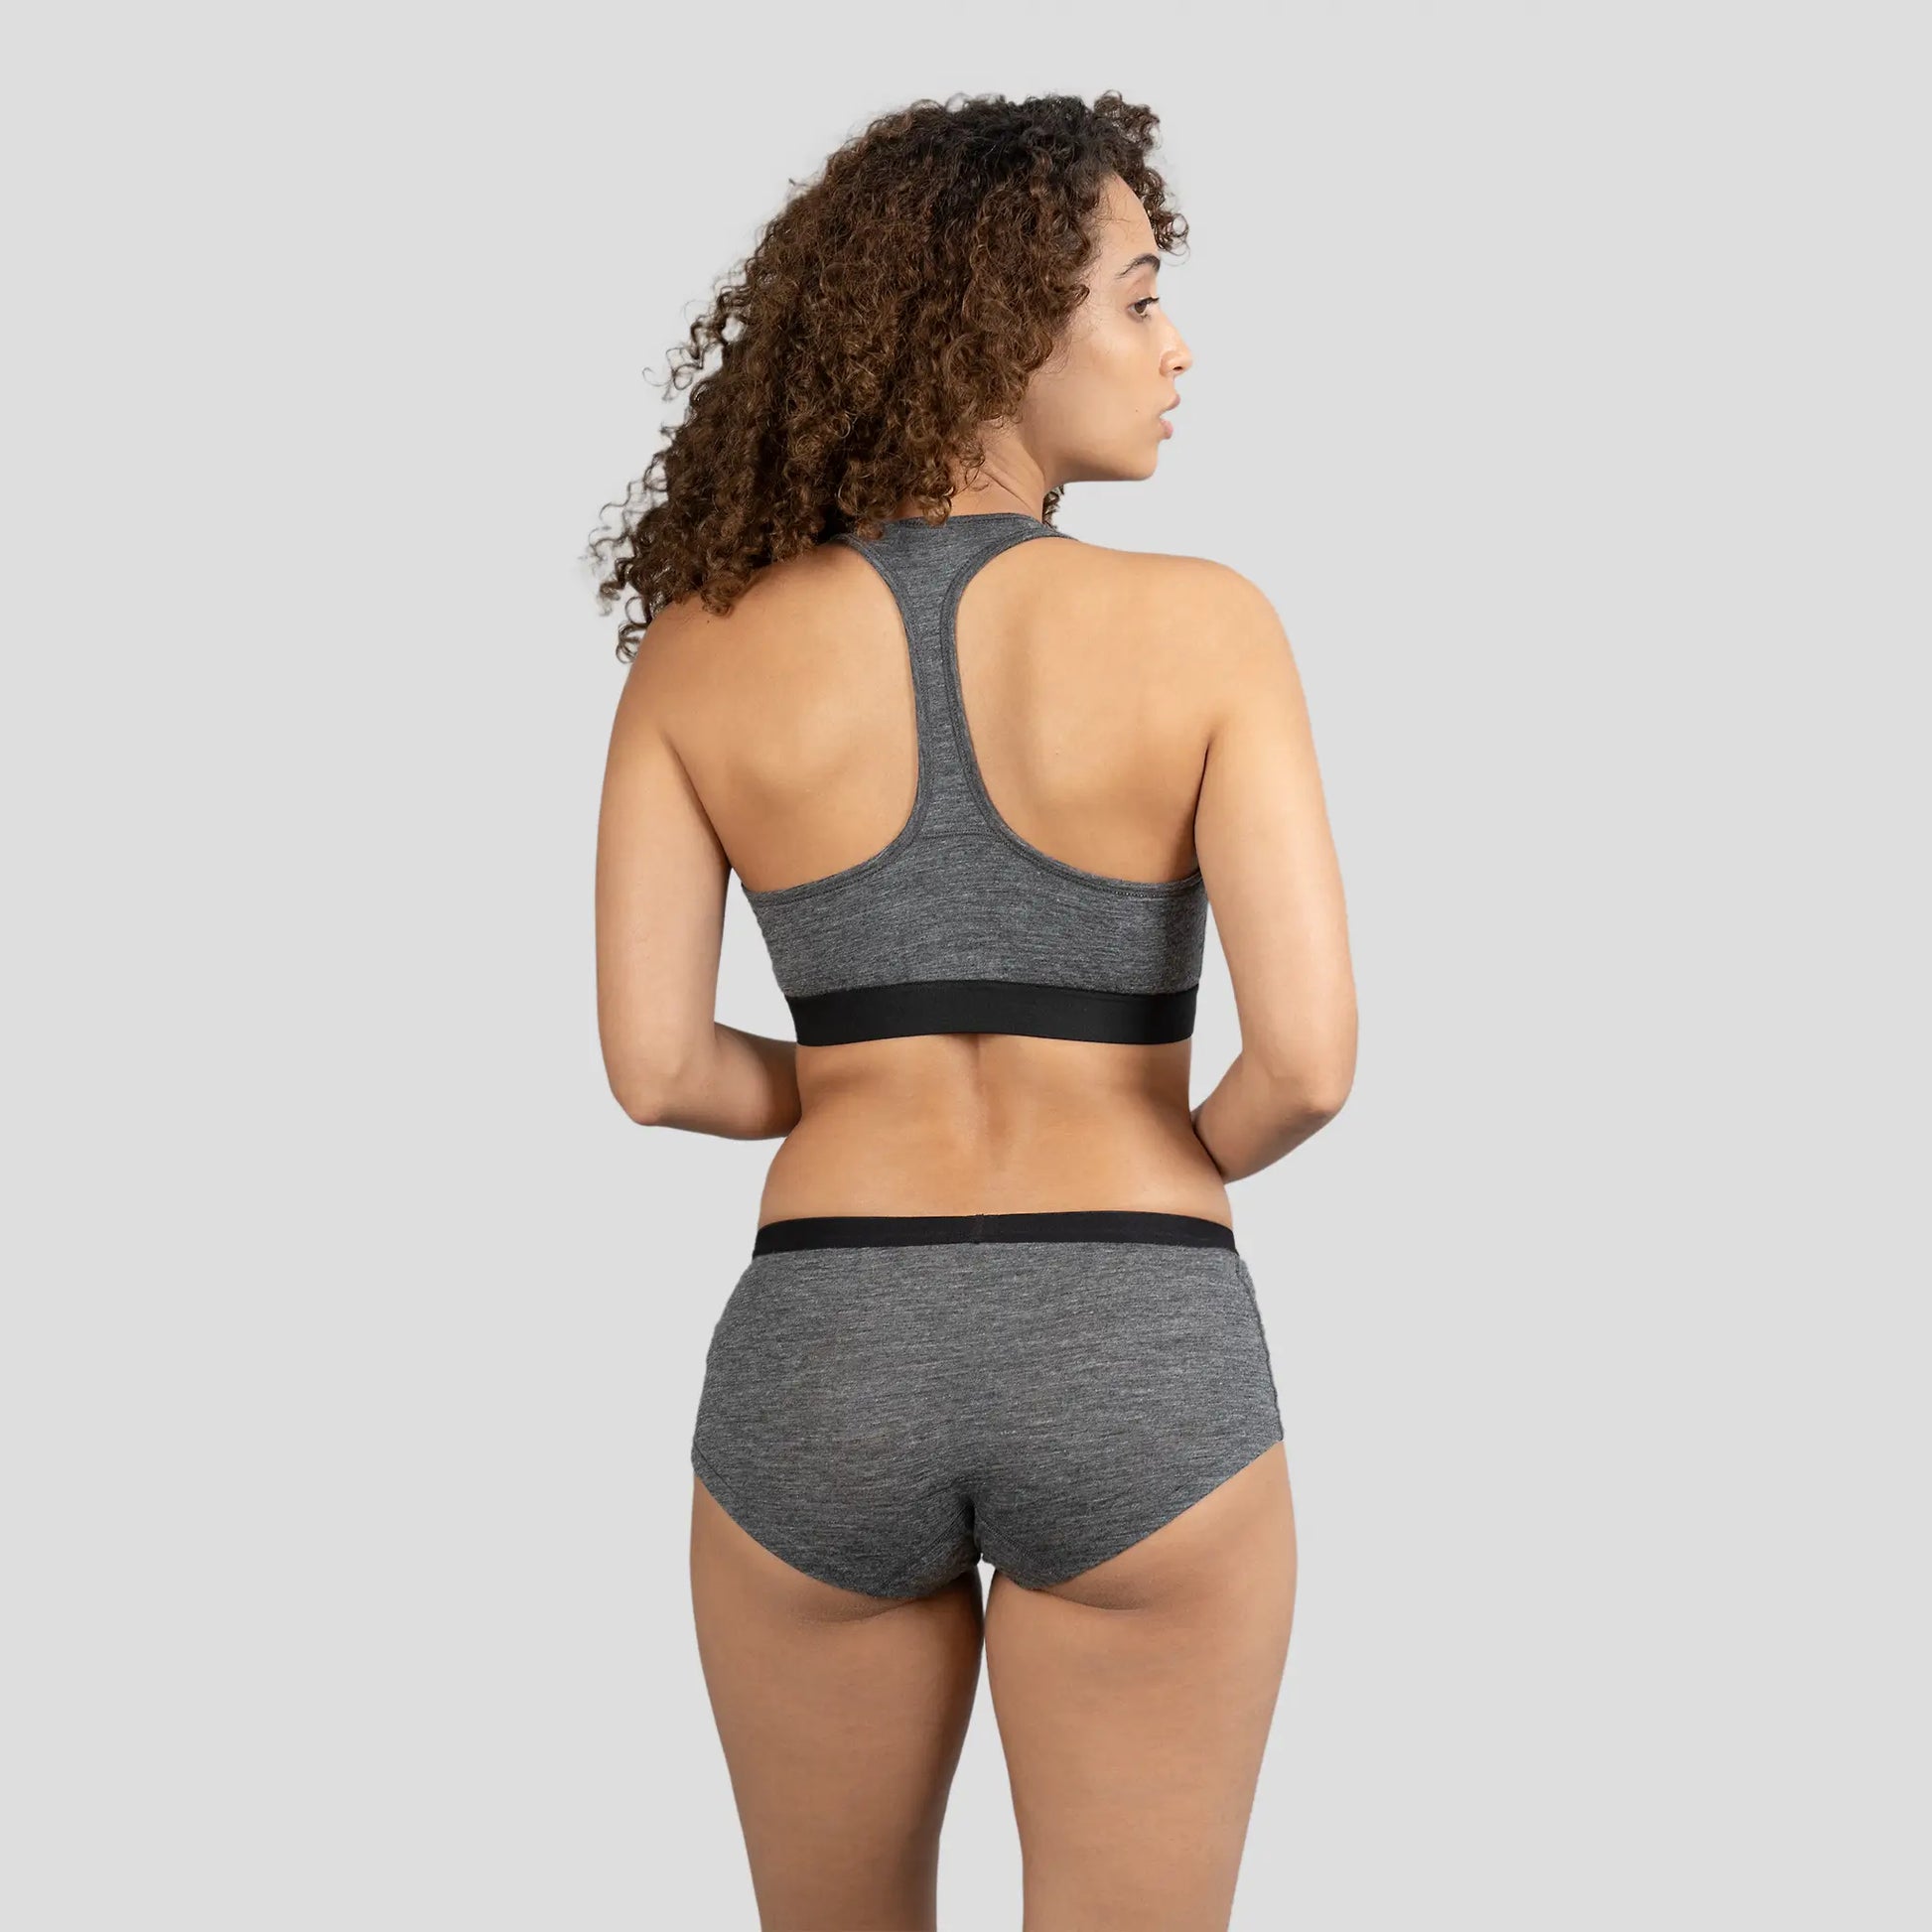 womens comfortable fit sports bra ultralight color gray